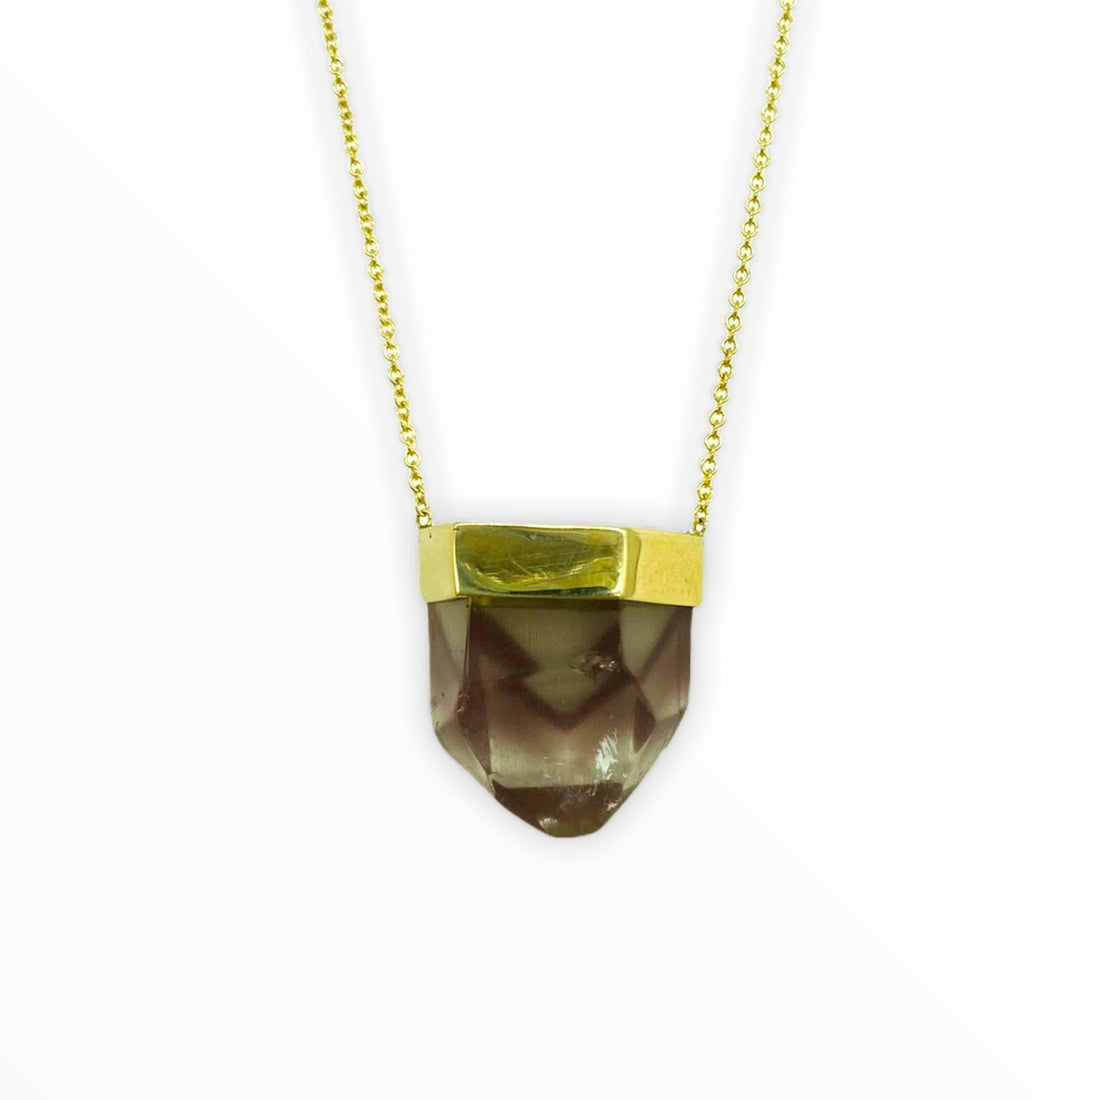 One of a Kind Lithium Quartz with Citrine Necklace - Ele Keats Jewelry